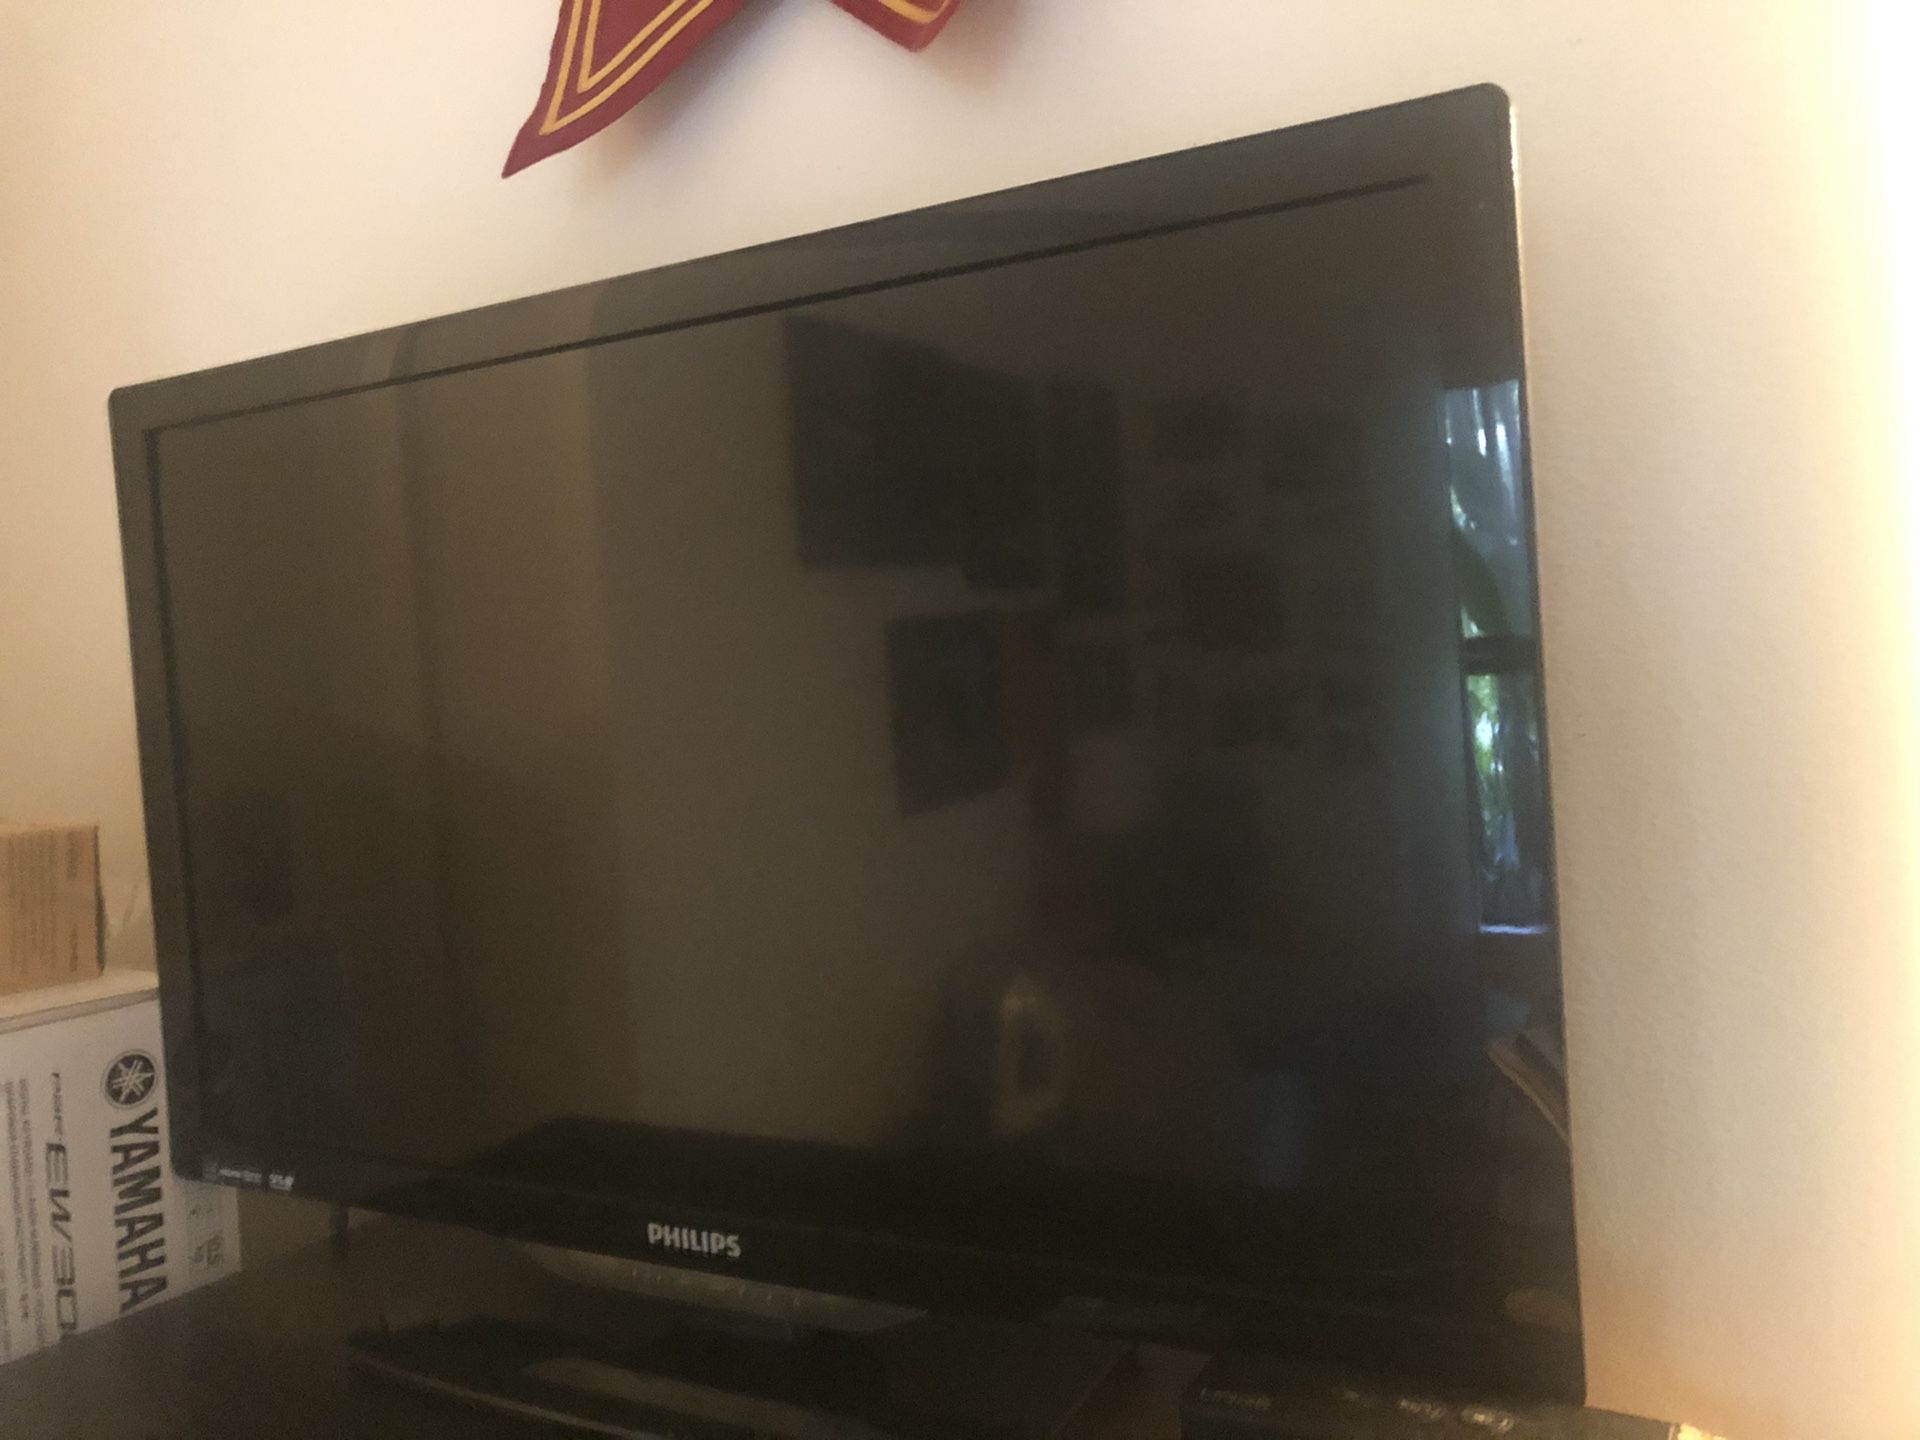 32inch Tv with free chromecast or bluetooth speaker